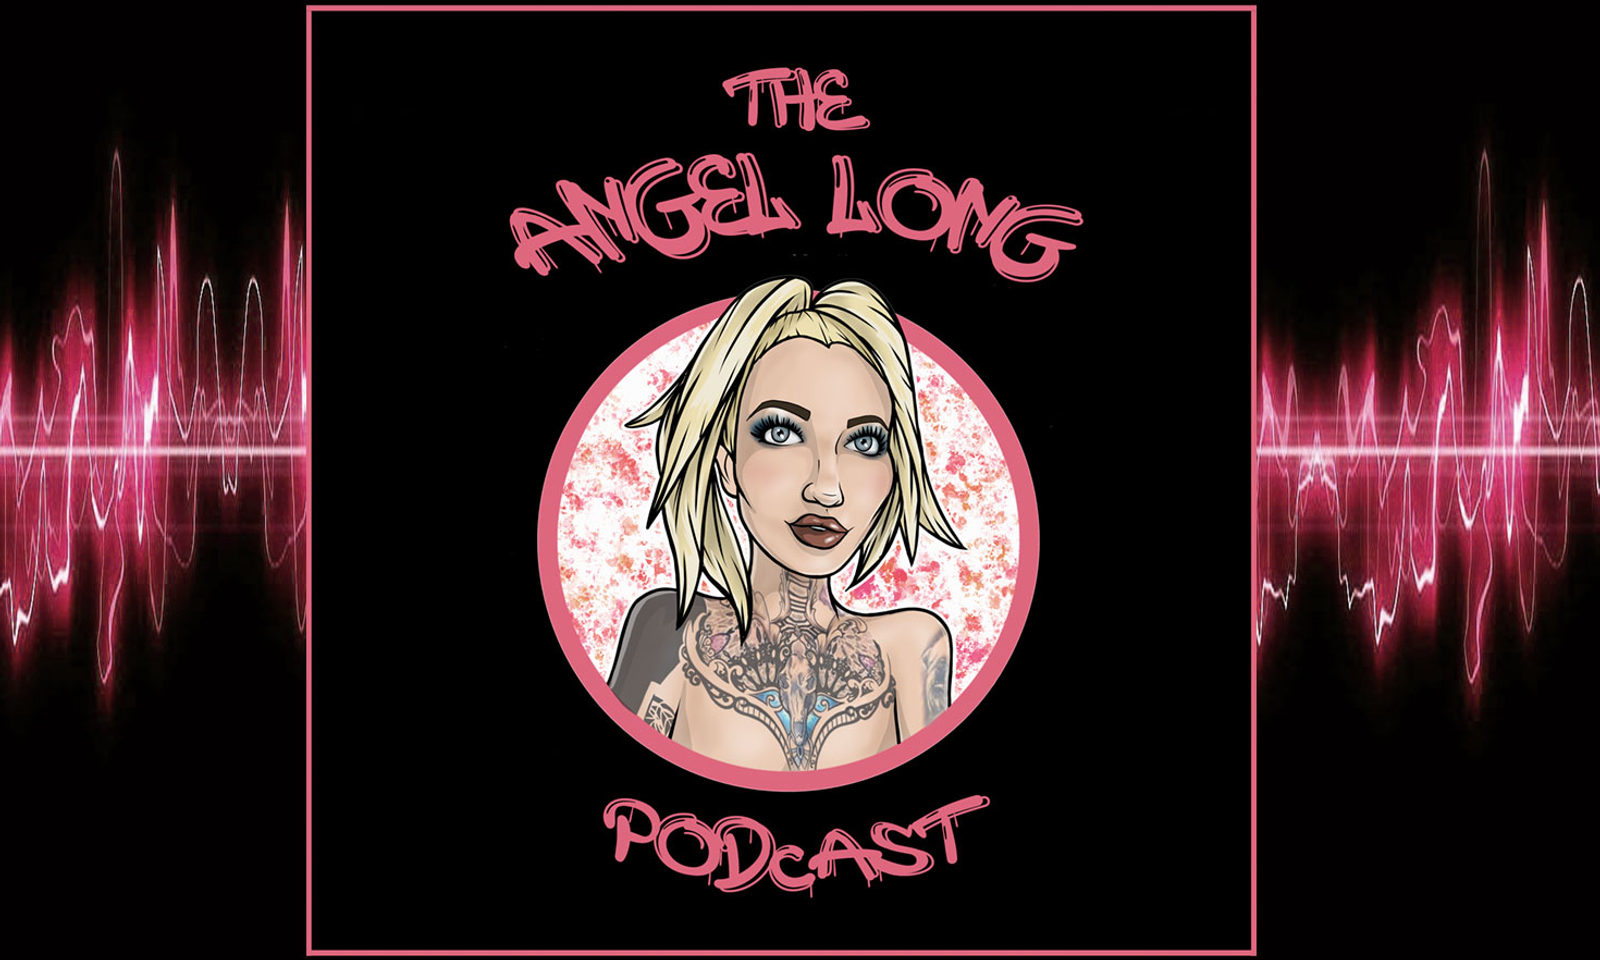 Alexxa Vice Guests on 'The Angel Long Podcast'